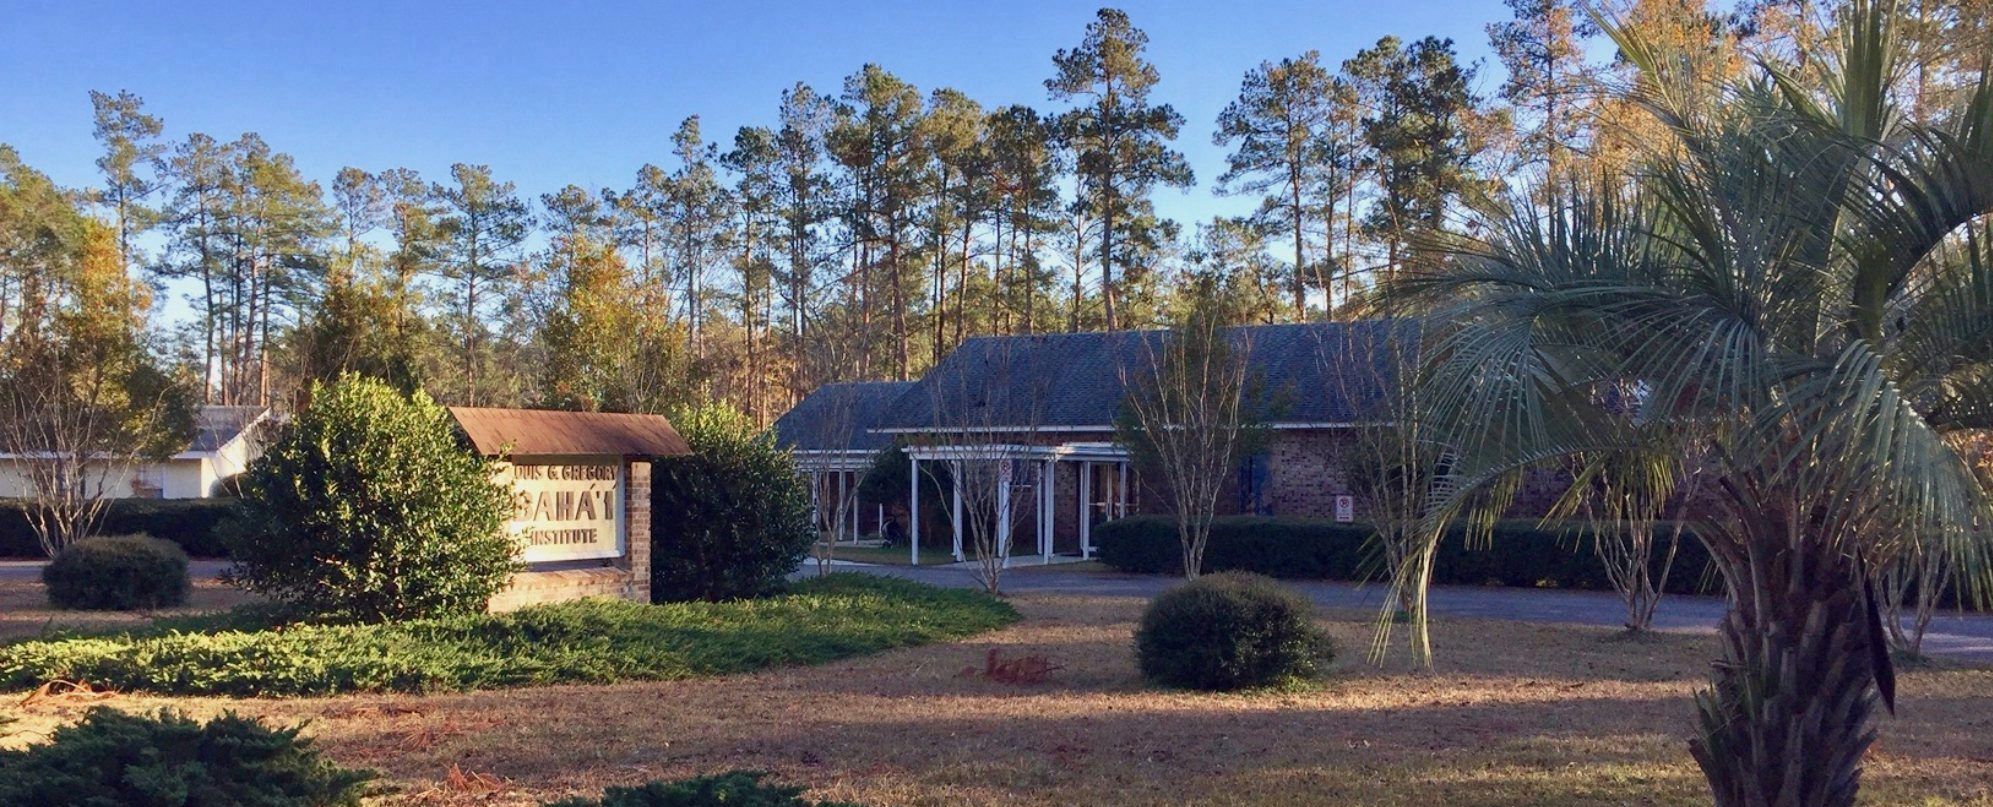 Pamoramic view of the front of the Louis Gregory Baha'i Institute in Hemingway, South Carolina